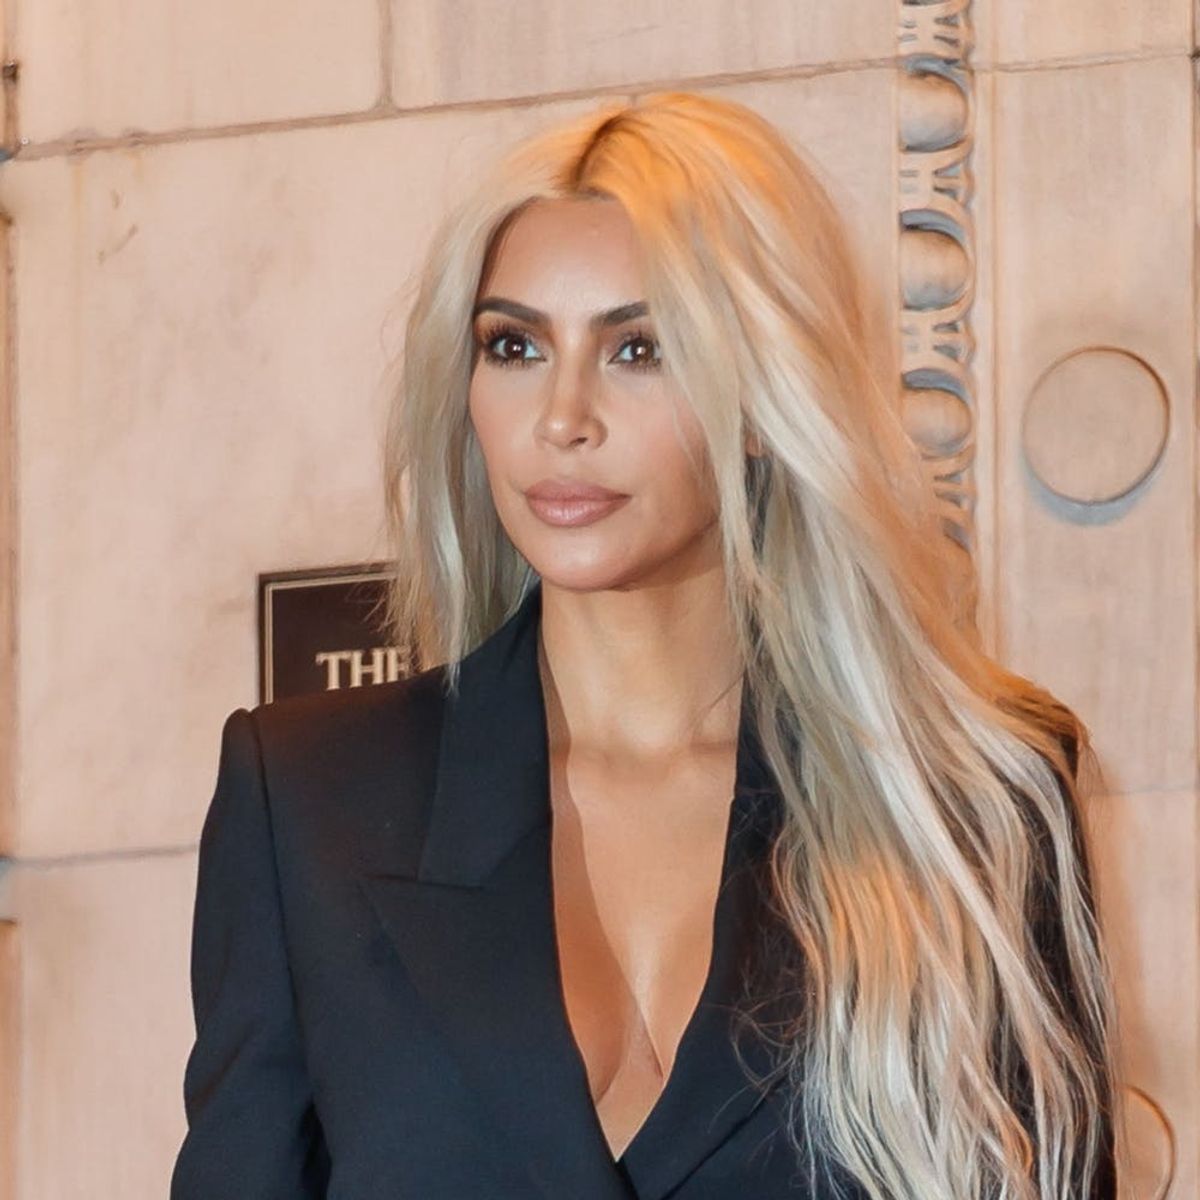 Breast Milk and Seaweed Are Just a Few Things Kim Kardashian West Has Used to Treat Psoriasis